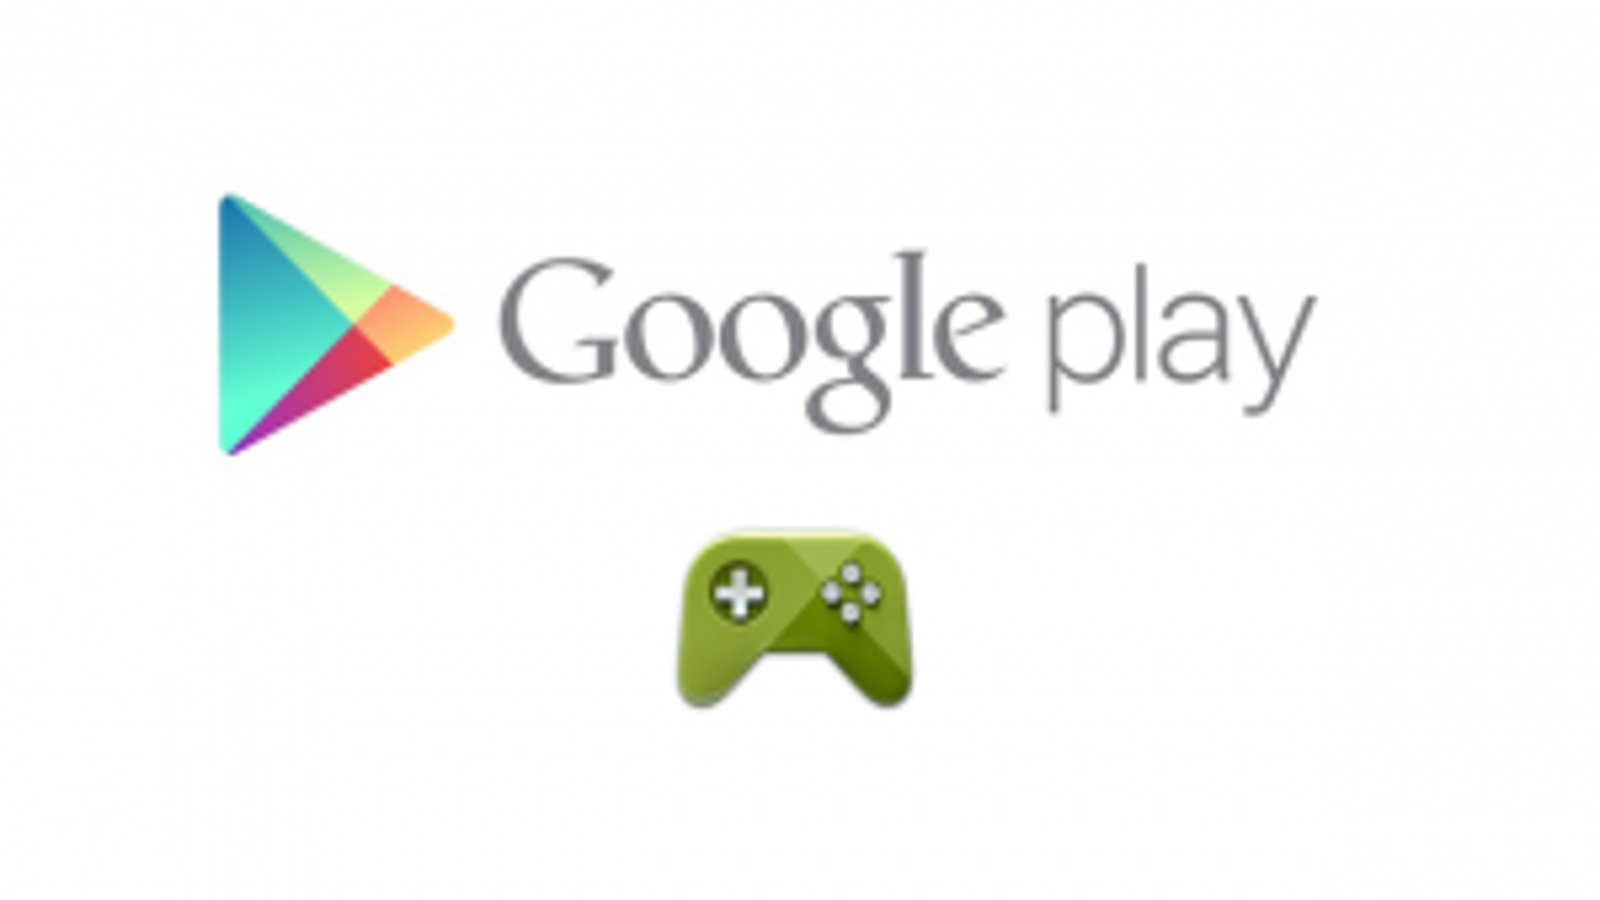 Google Play games services announced